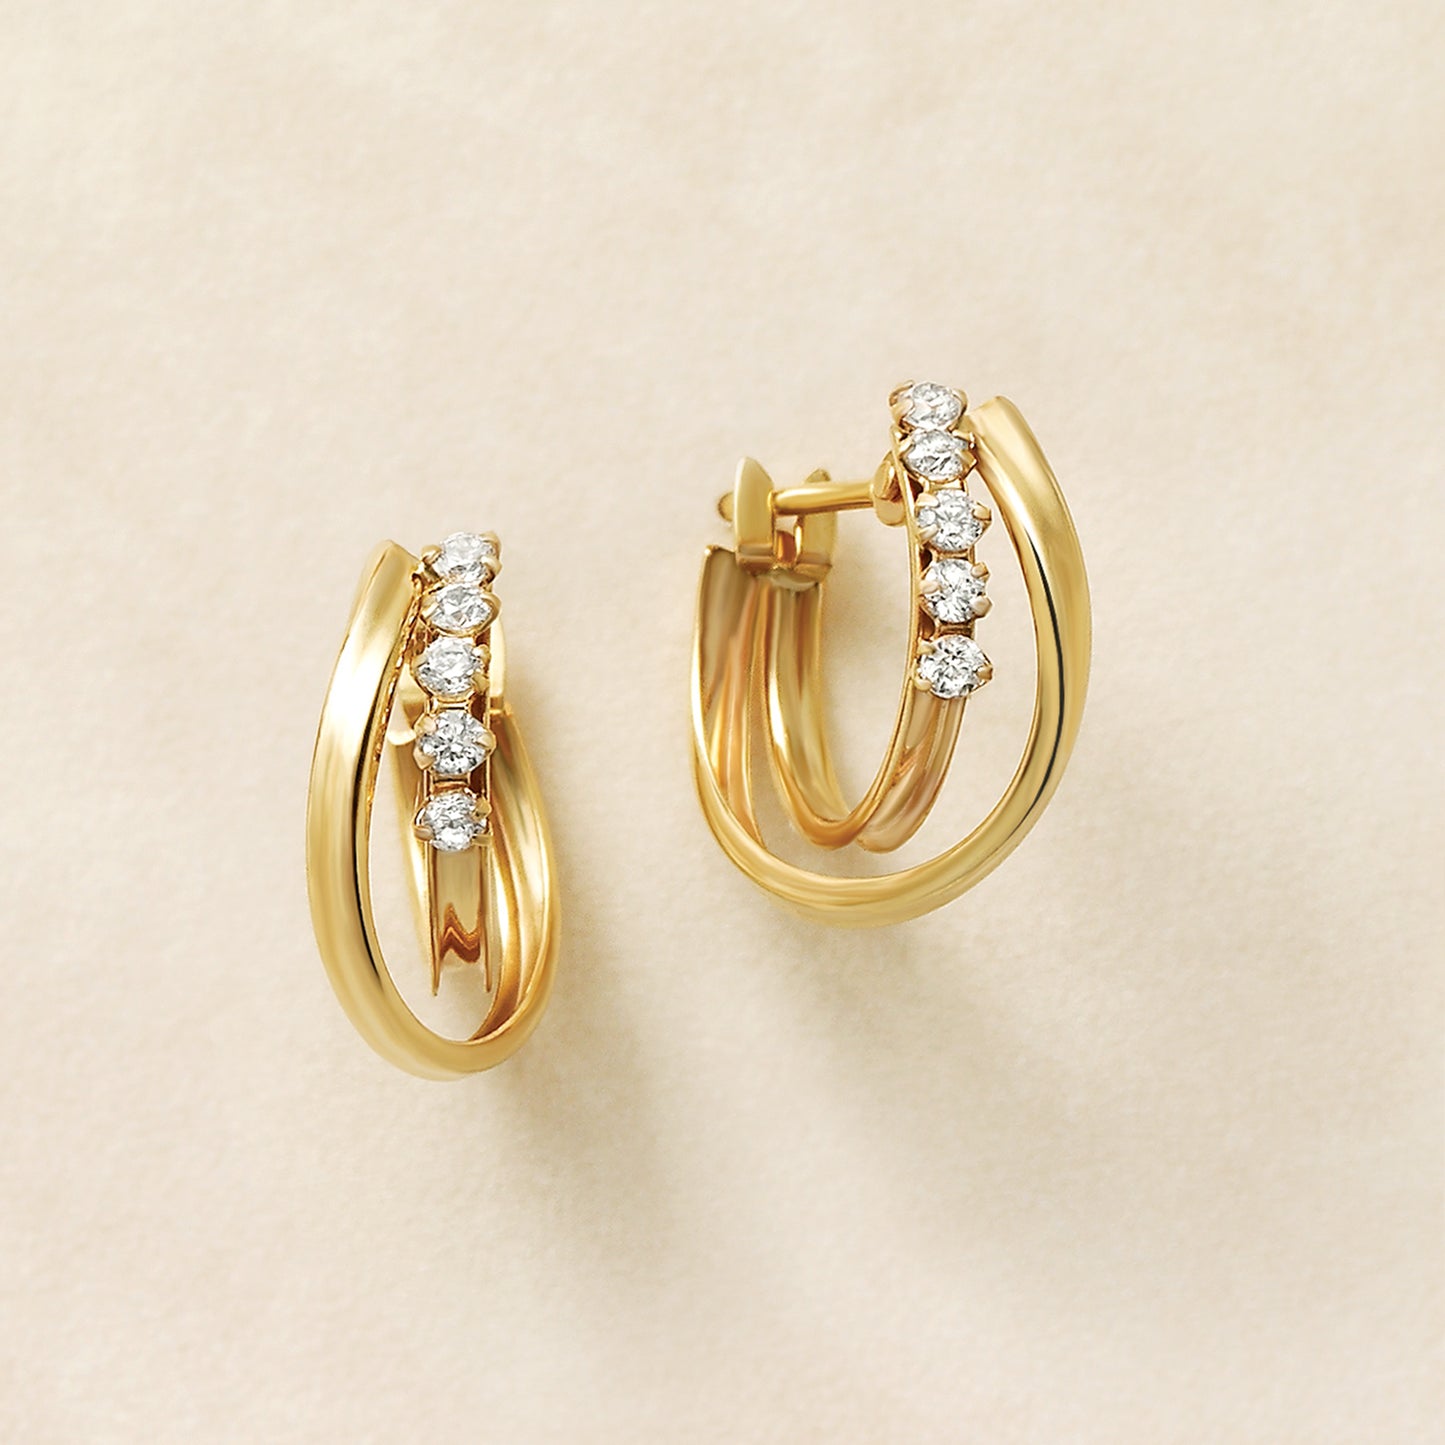 18K / 10K Yellow Gold Double Twisted Hoop Earrings - Product Image